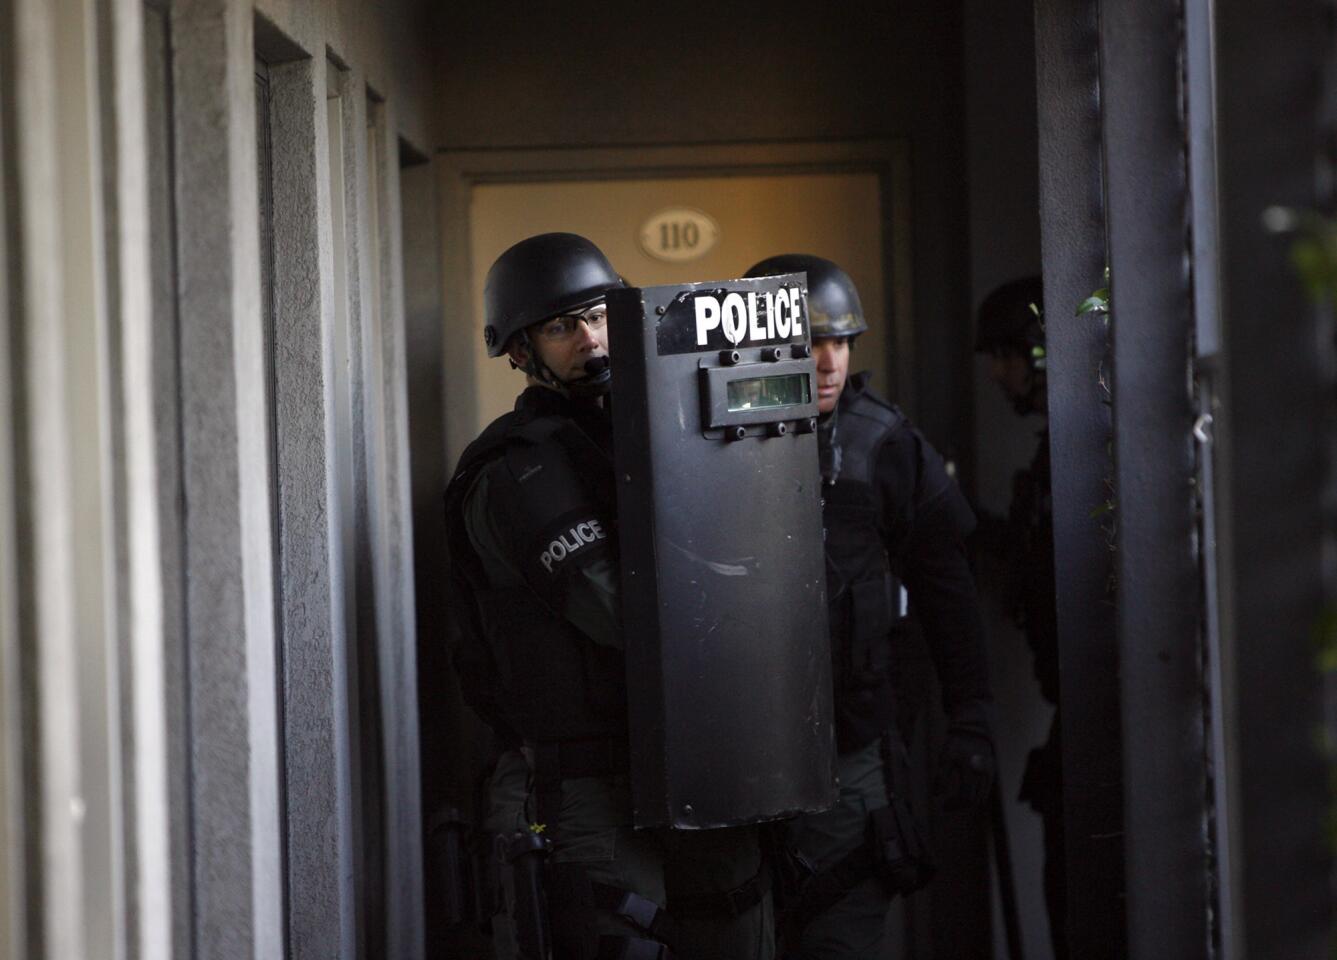 Members of the Glendale Police Dept. SWAT team search for mock suspect during training exercises at the now-closed Golden Key Hotel in Glendale on Thursday, January 19, 2012. The GPD and Glendale Fire Dept. are staging training exercises in the empty building before it is demolished.